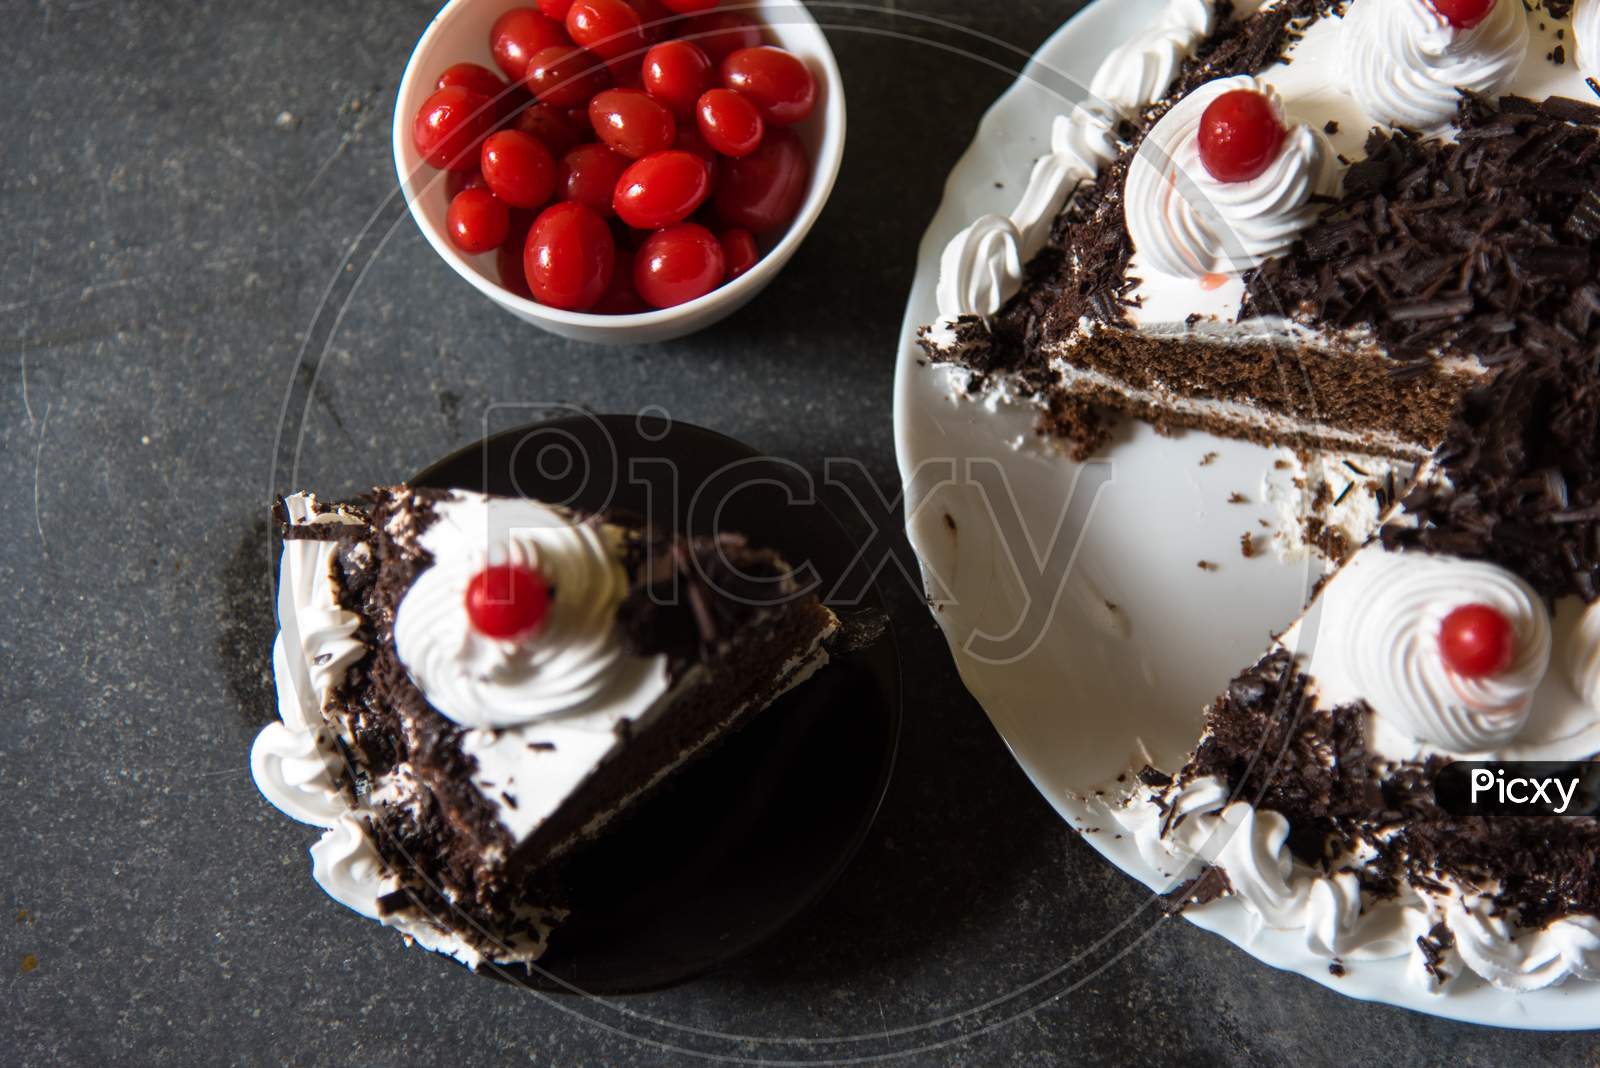 A Slice Of Black Forest Cake And Cherries